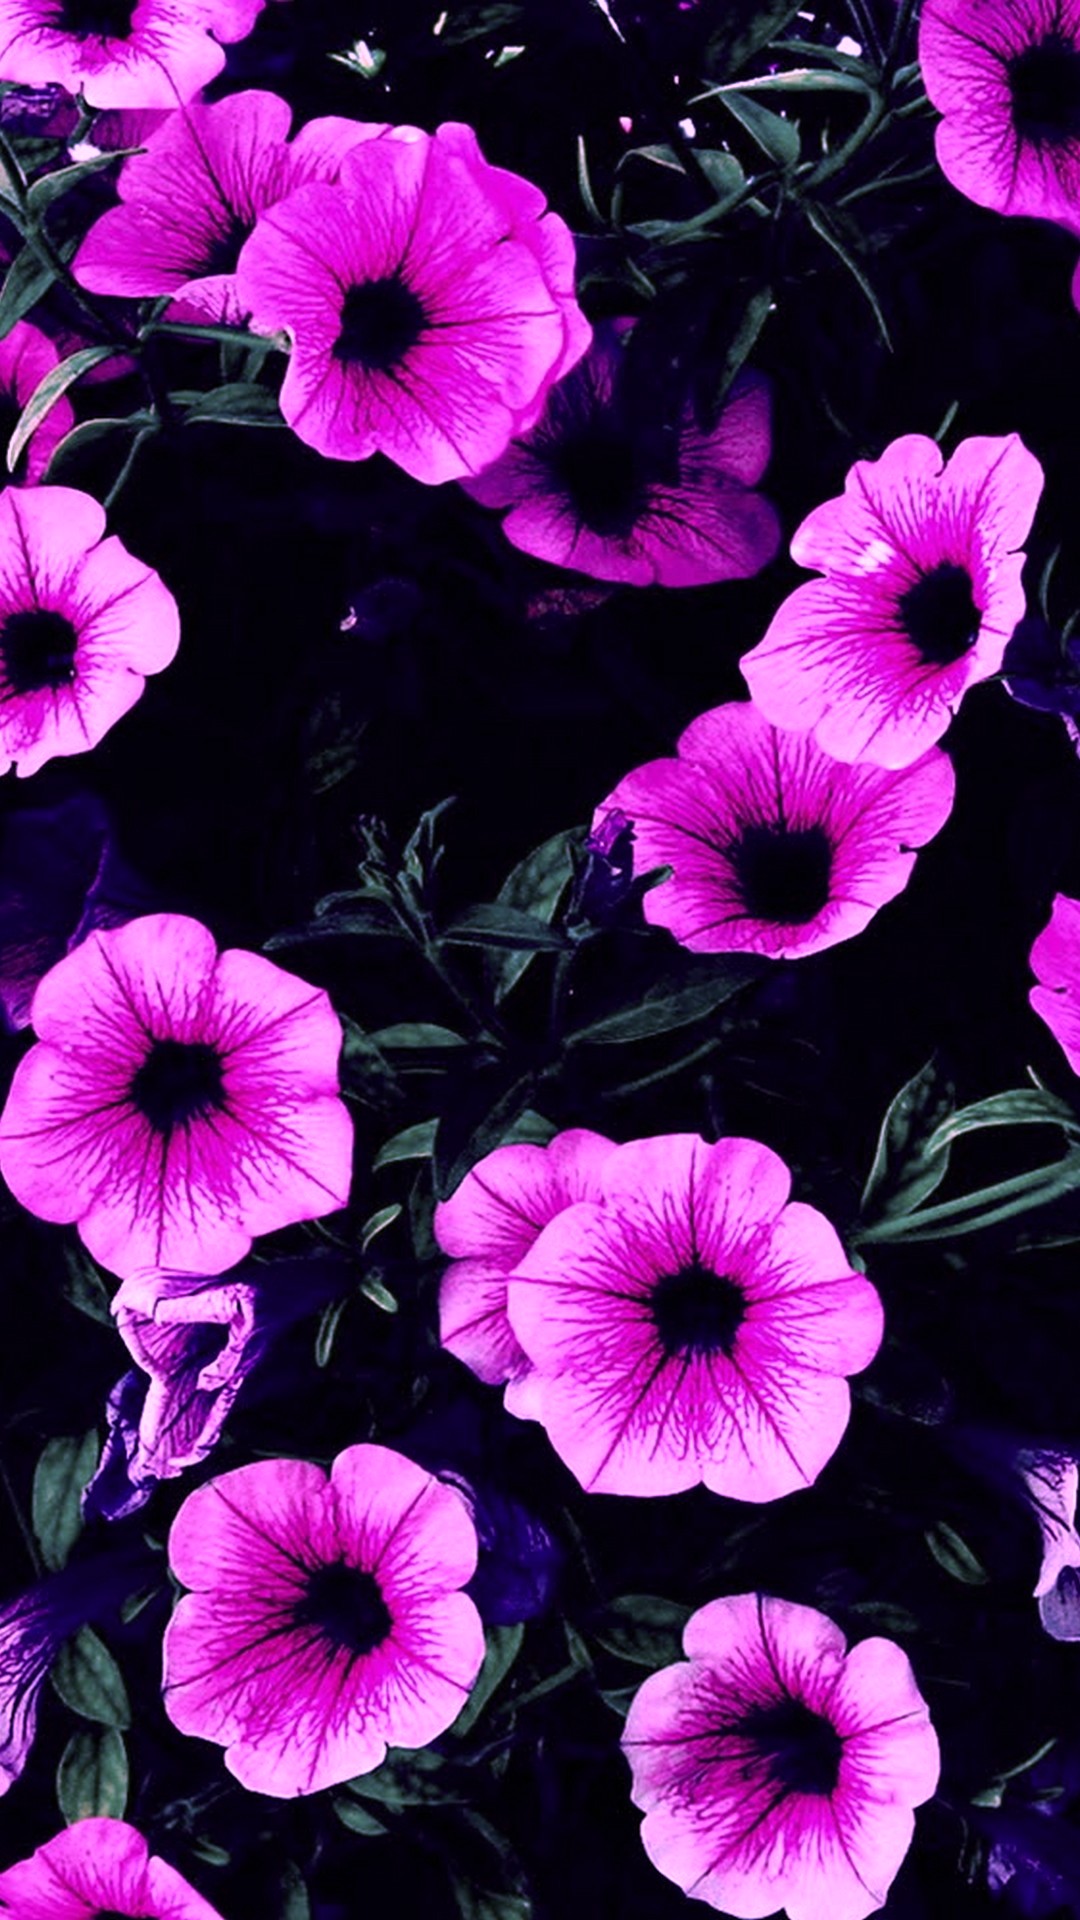 Flowers Purple Wallpaper Android With high-resolution 1080X1920 pixel. You can use this wallpaper for your Android backgrounds, Tablet, Samsung Screensavers, Mobile Phone Lock Screen and another Smartphones device